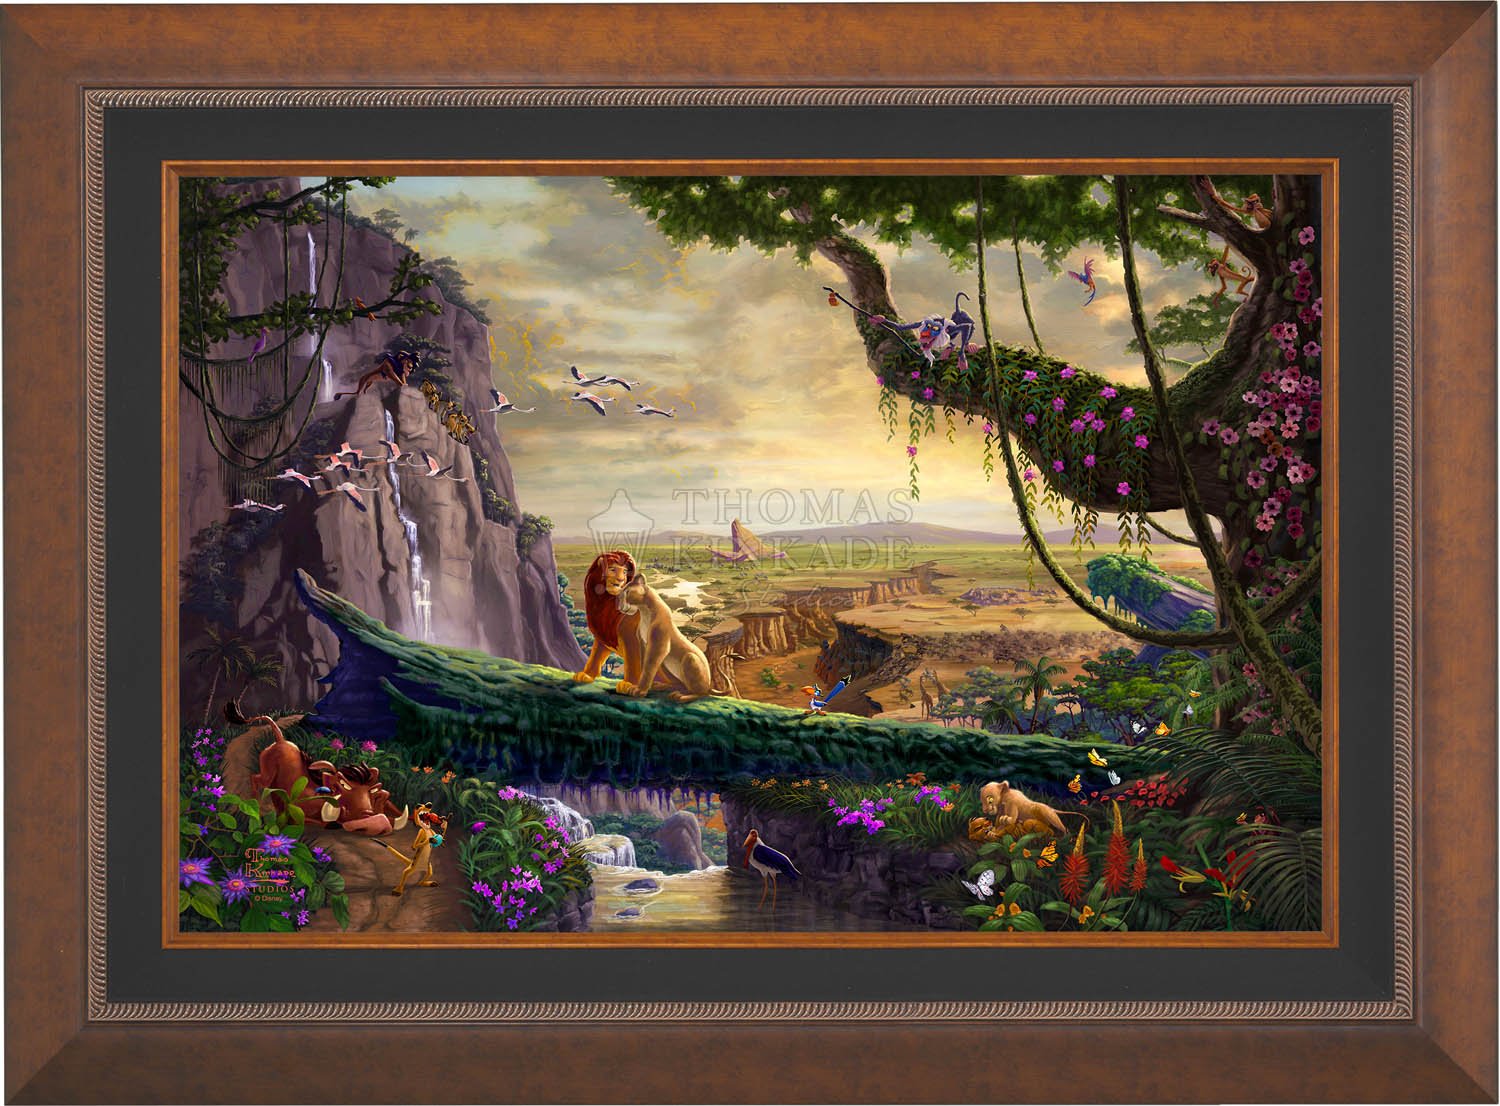 Simba and Nala, as a young adult, finding love, and in the distance presenting his son back on Pride Rock - Aurora Copper  Frame.